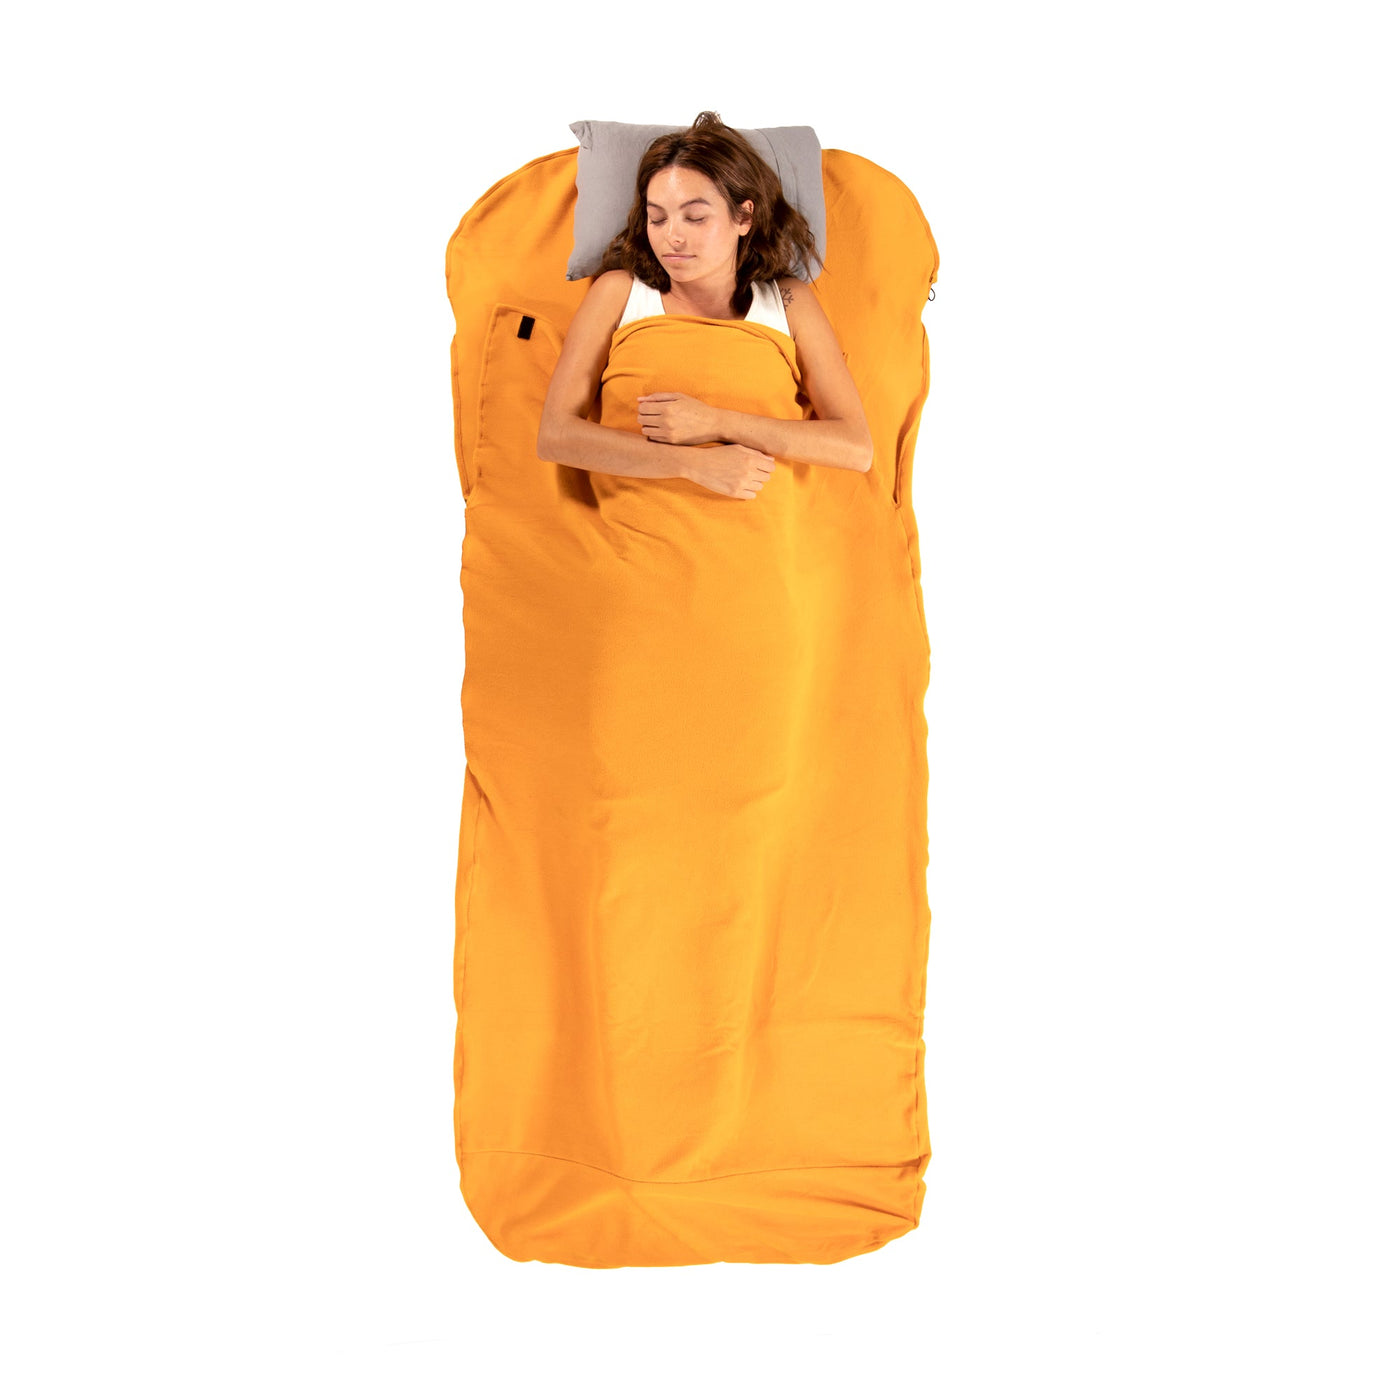 Nest Sleeping Bag Liner - Cold Weather by Klymit